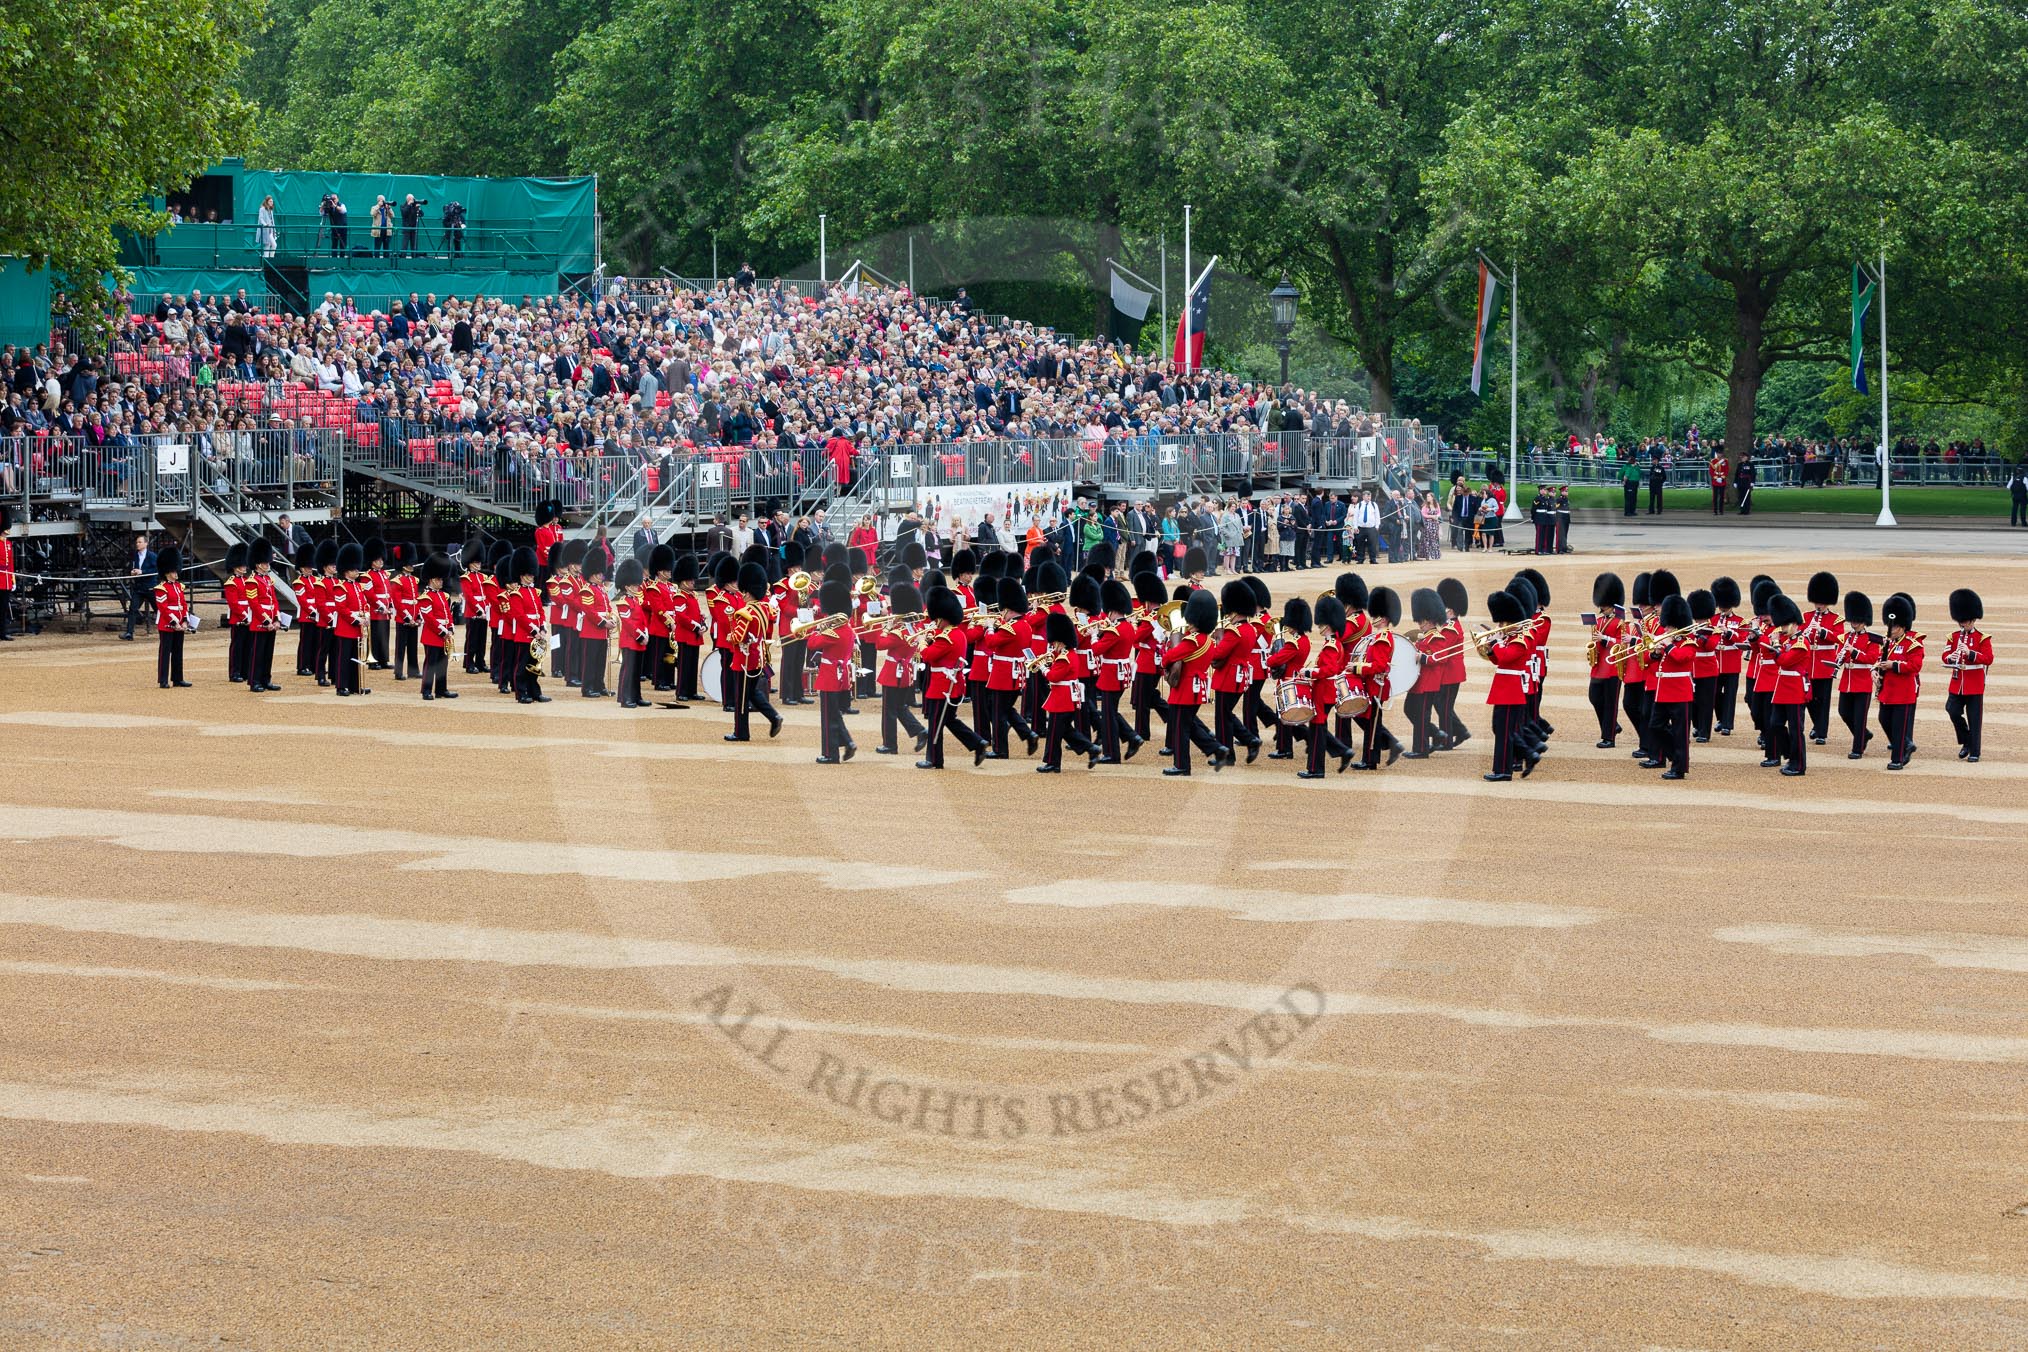 The Colonel's Review 2016.
Horse Guards Parade, Westminster,
London,

United Kingdom,
on 04 June 2016 at 10:19, image #49